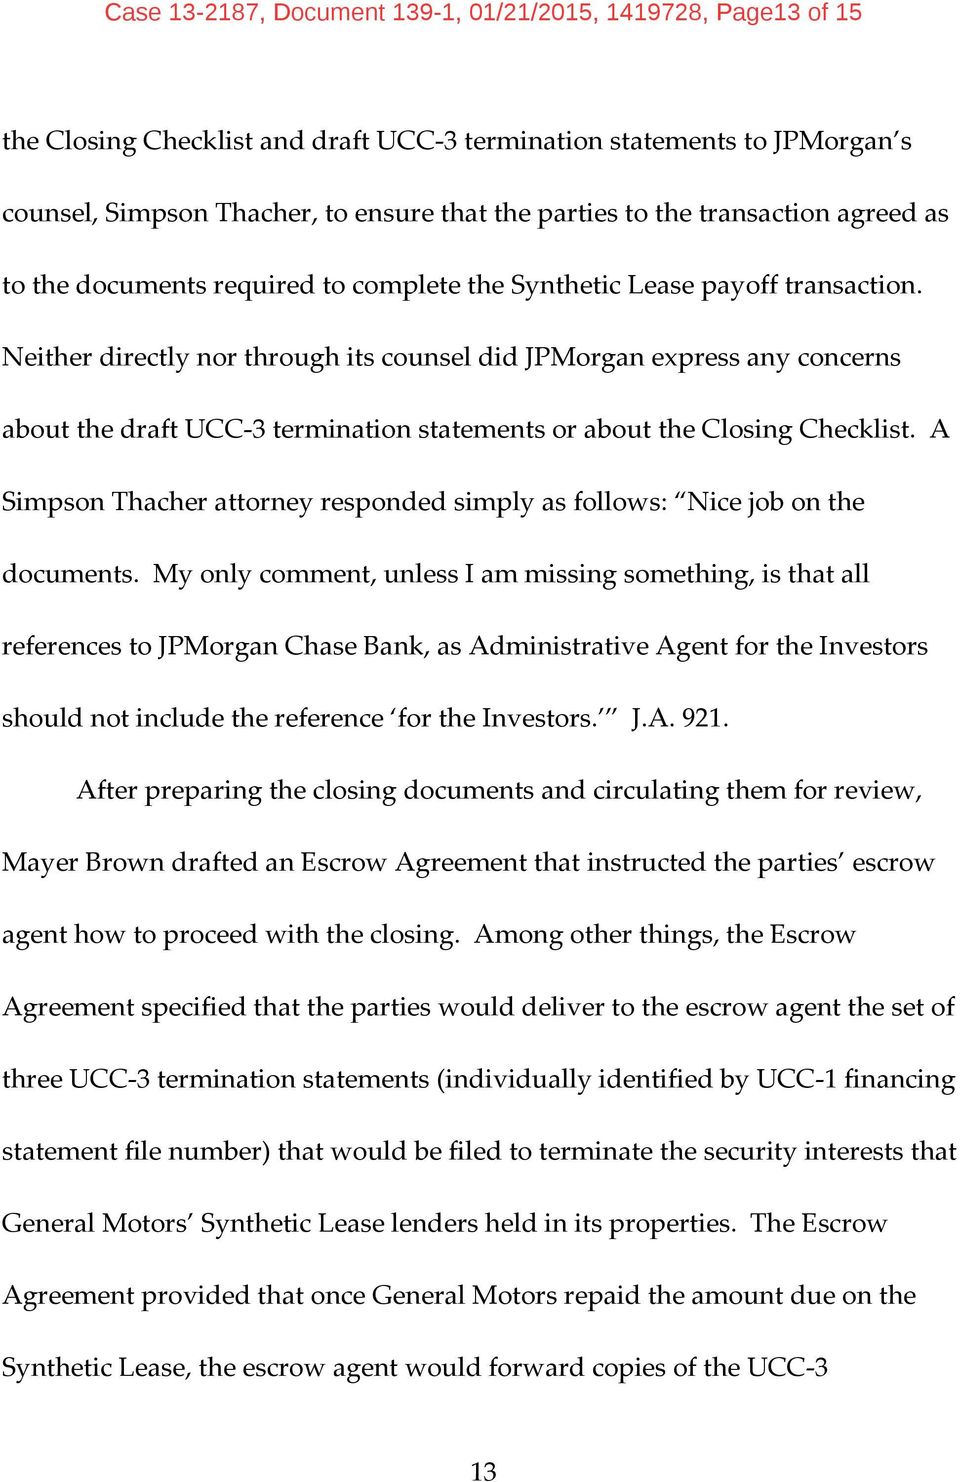 Neither directly nor through its counsel did JPMorgan express any concerns about the draft UCC 3 termination statements or about the Closing Checklist.